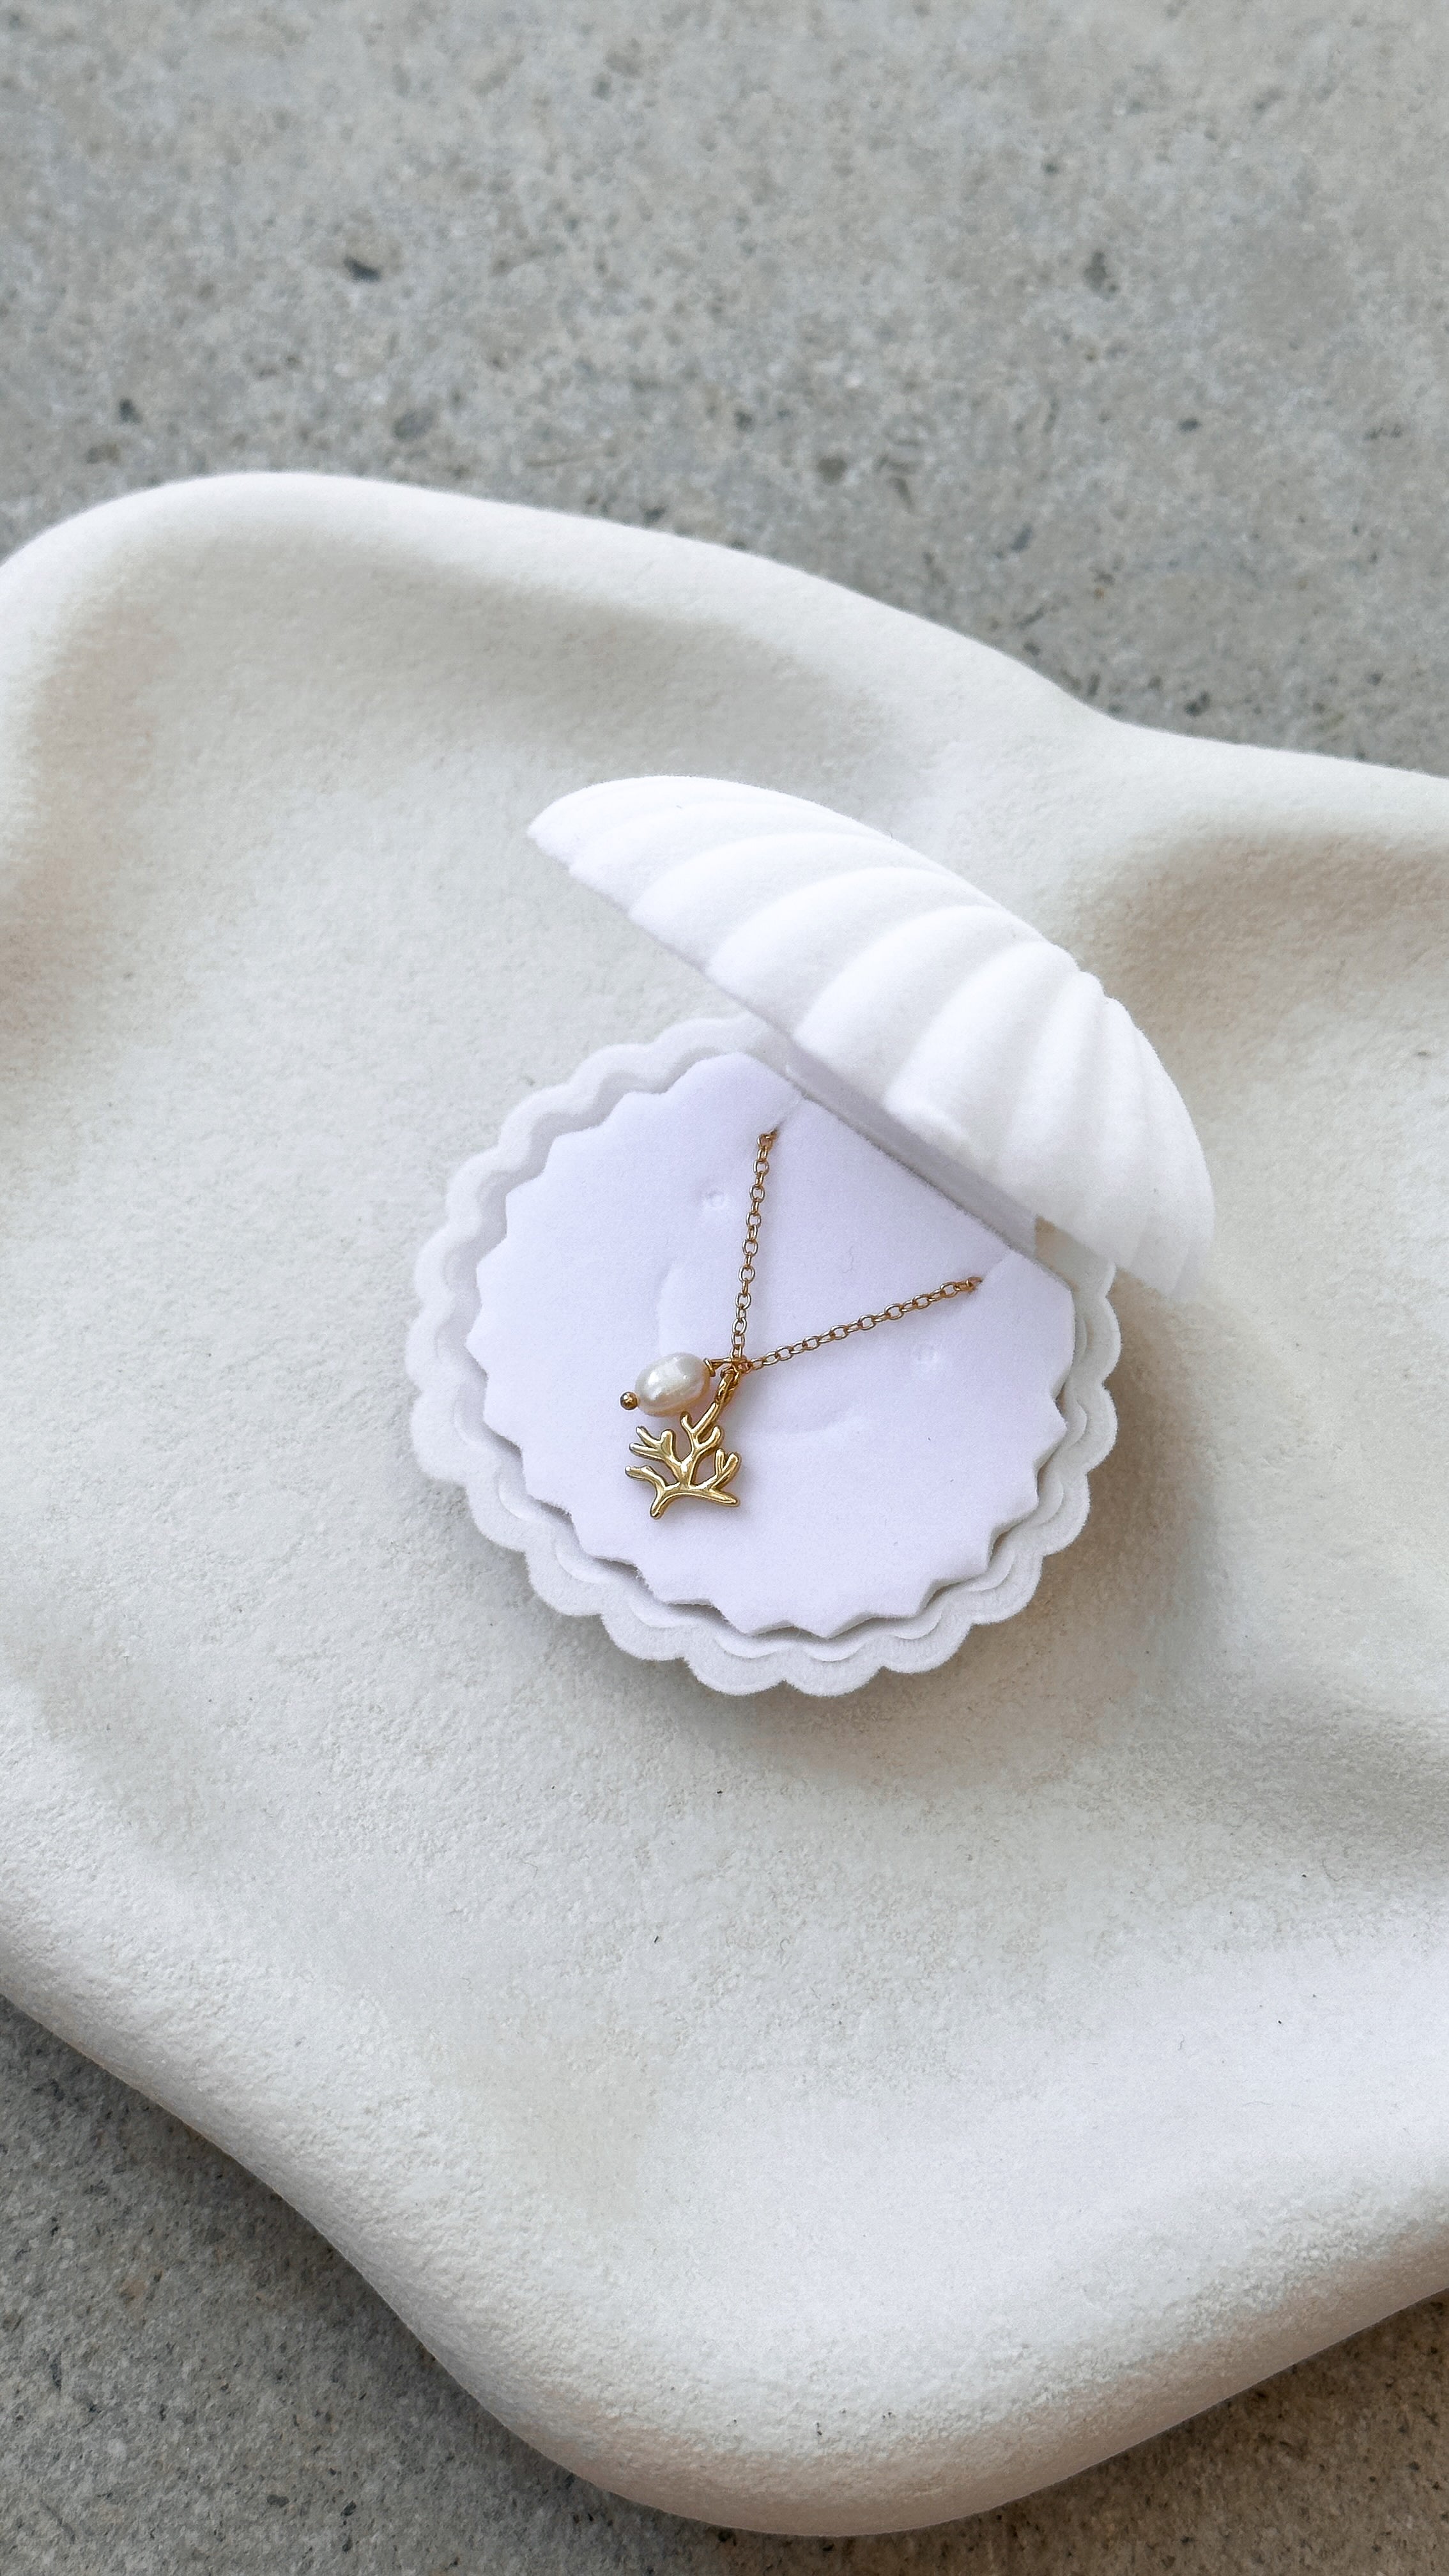 Coral Cove Necklace - 18k Gold